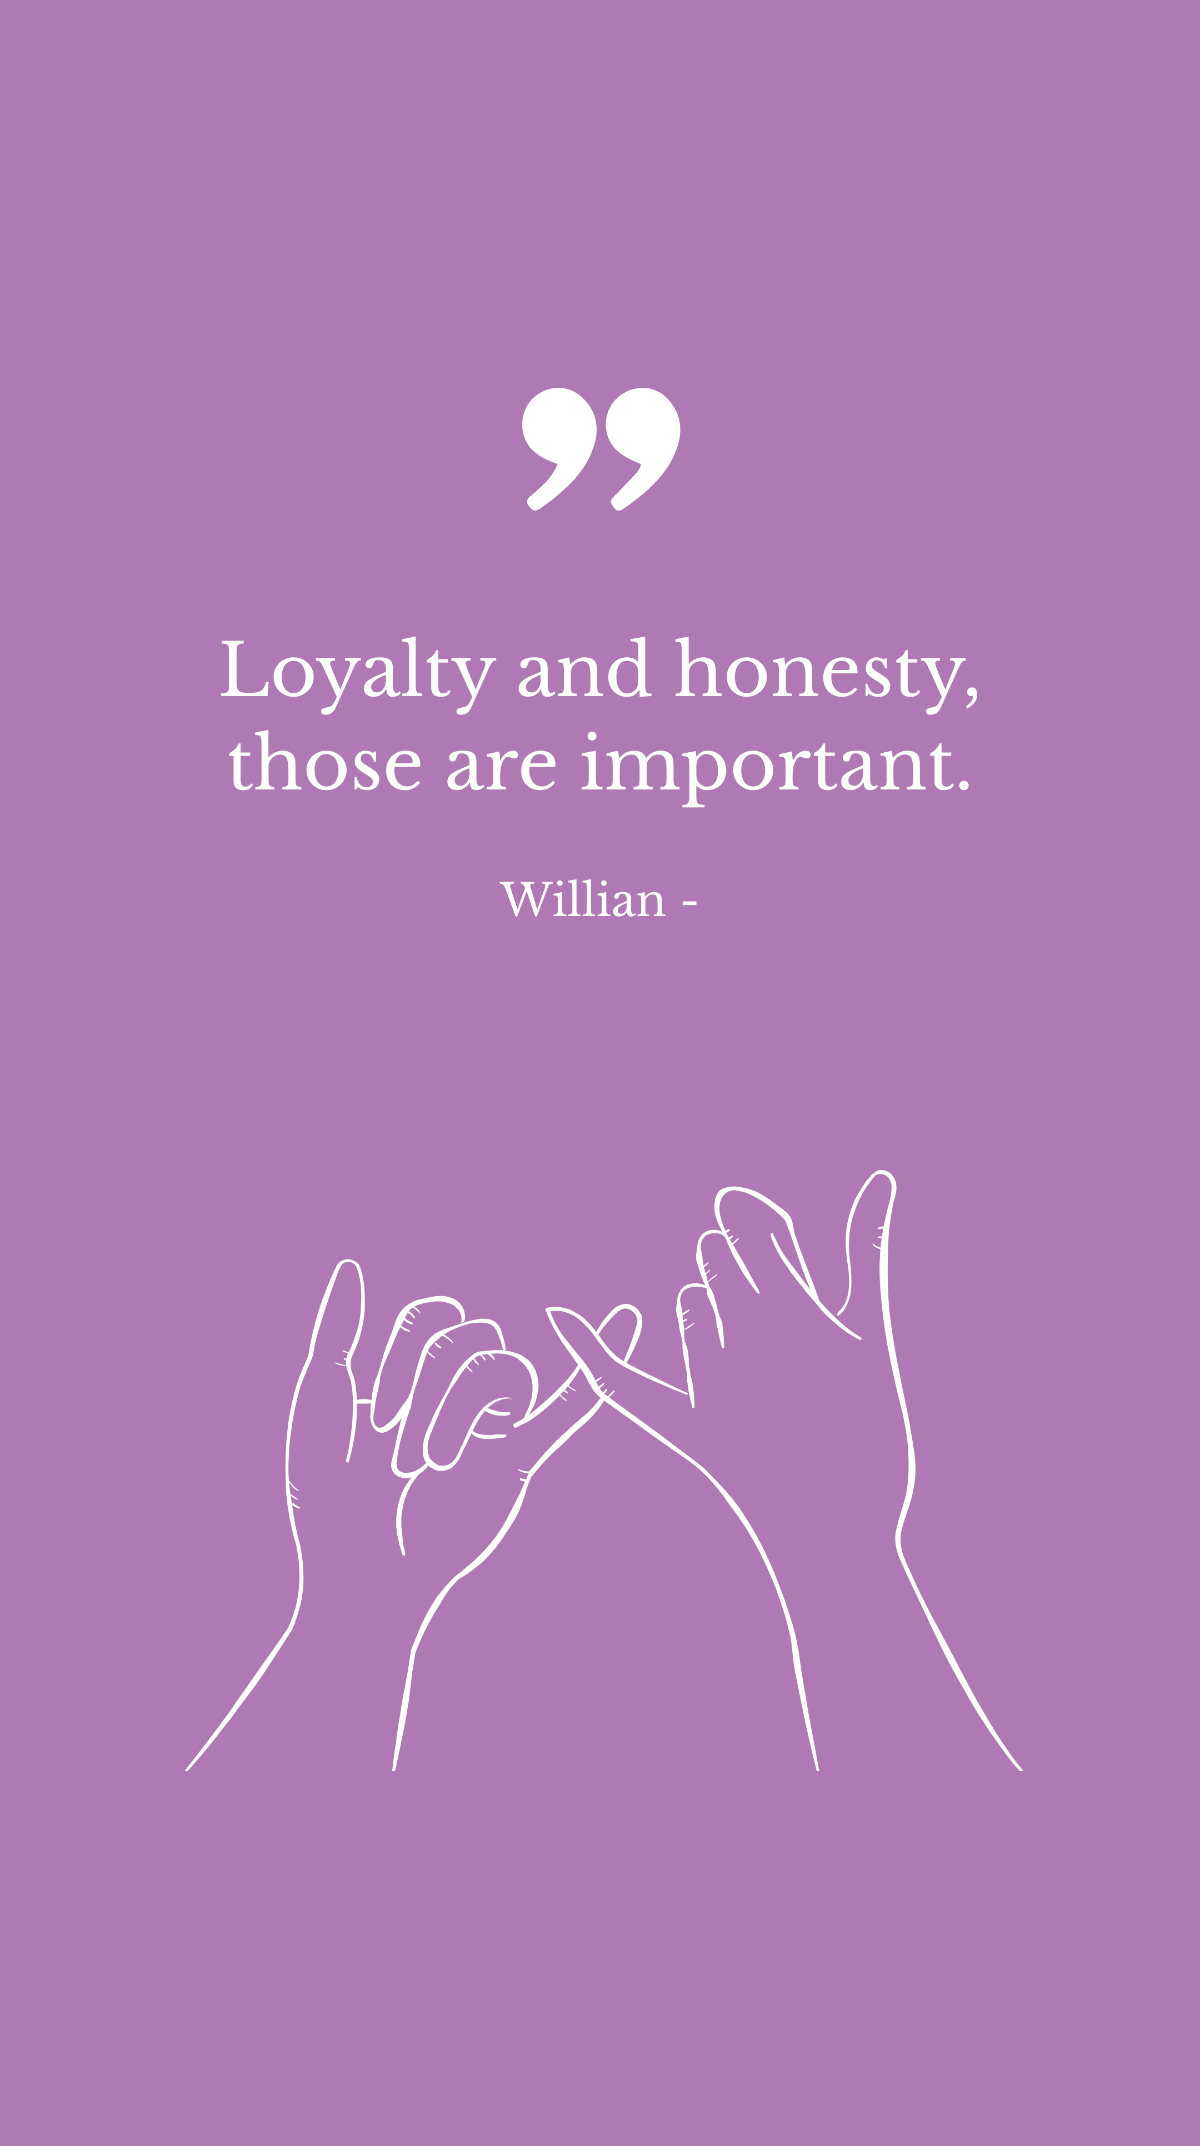 Willian - Loyalty and honesty, those are important. Template